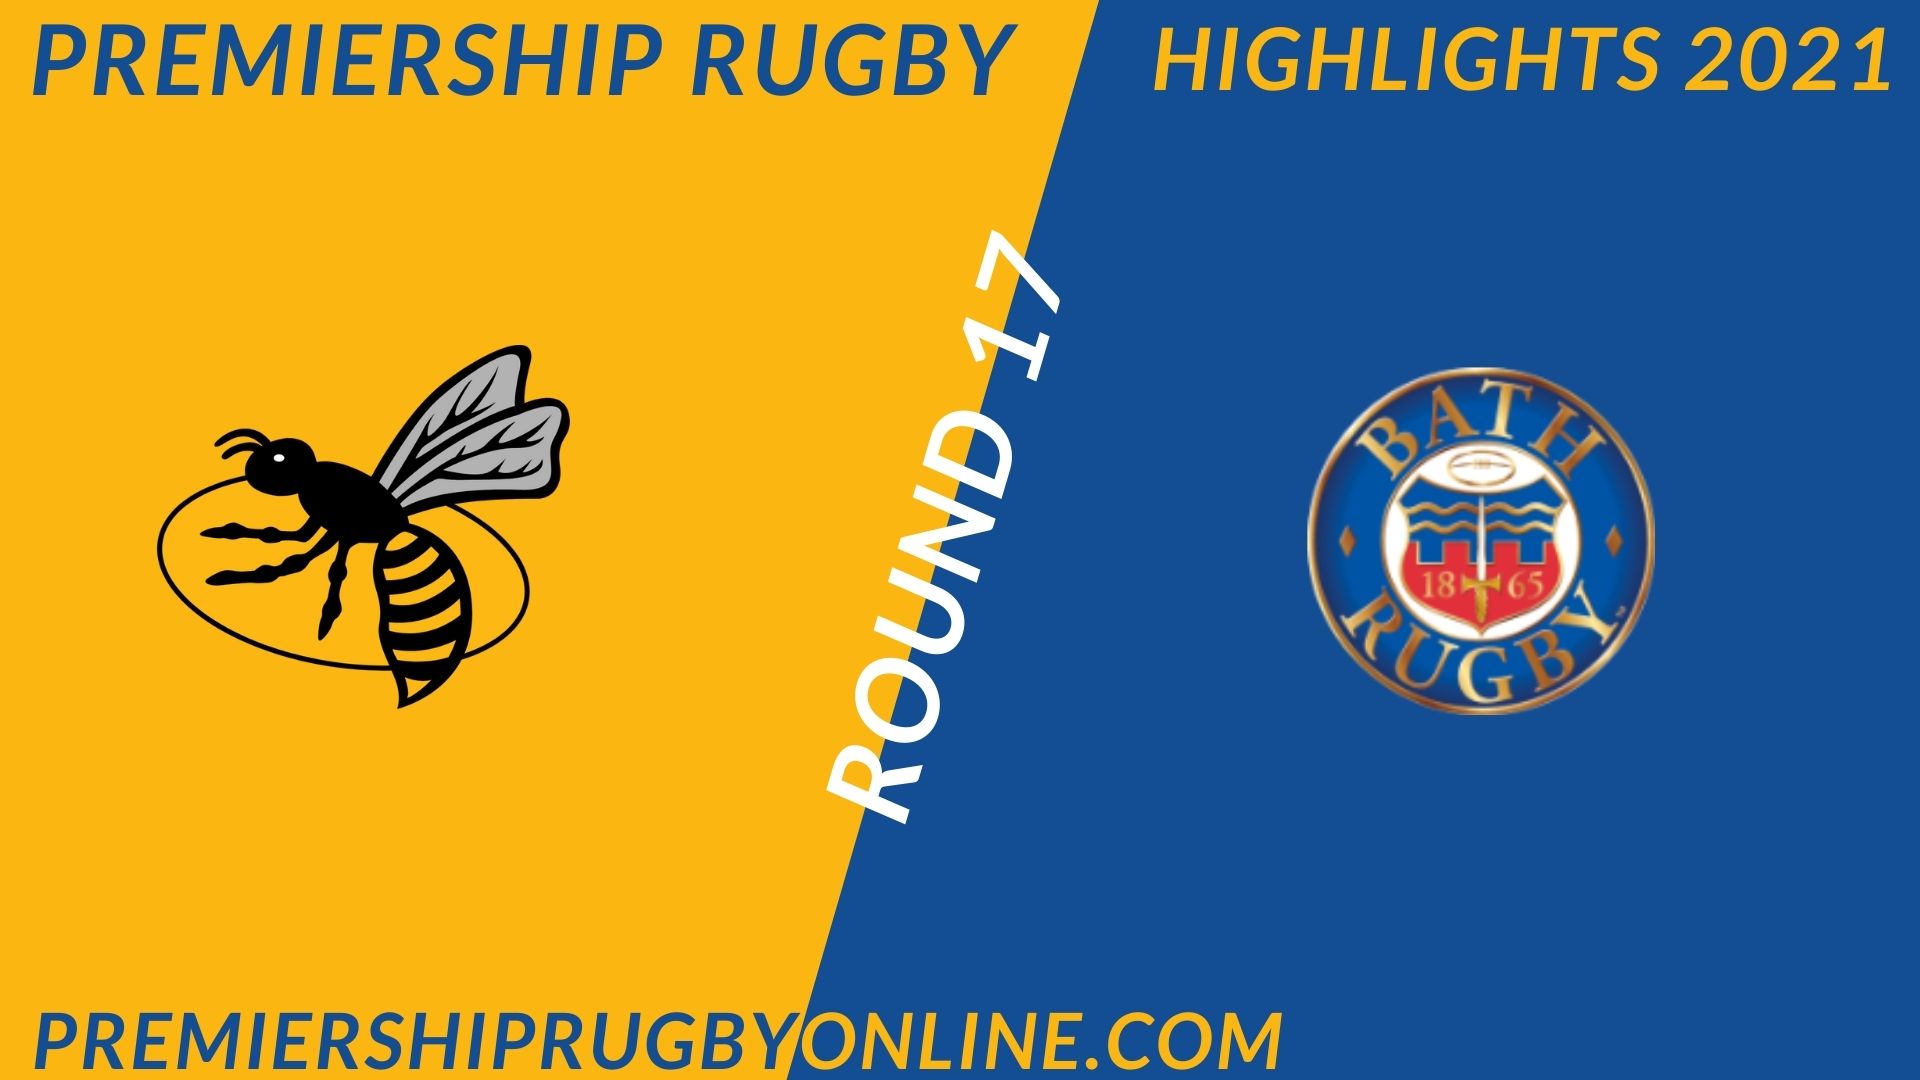 Wasps Vs Bath Rugby Highlights 2021 RD 17